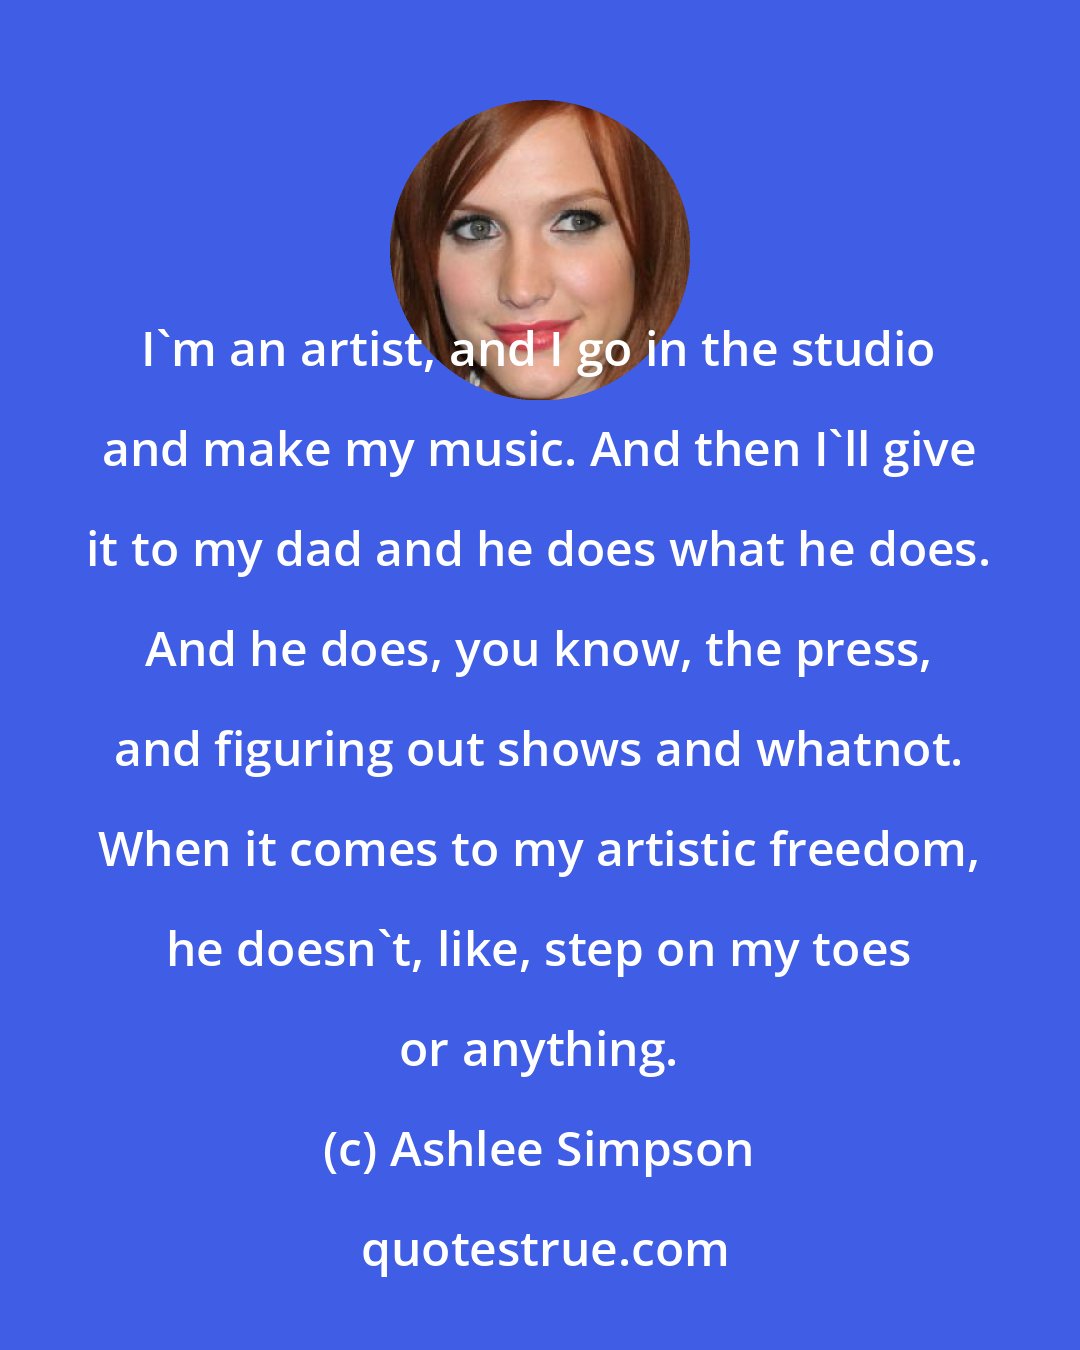 Ashlee Simpson: I'm an artist, and I go in the studio and make my music. And then I'll give it to my dad and he does what he does. And he does, you know, the press, and figuring out shows and whatnot. When it comes to my artistic freedom, he doesn't, like, step on my toes or anything.